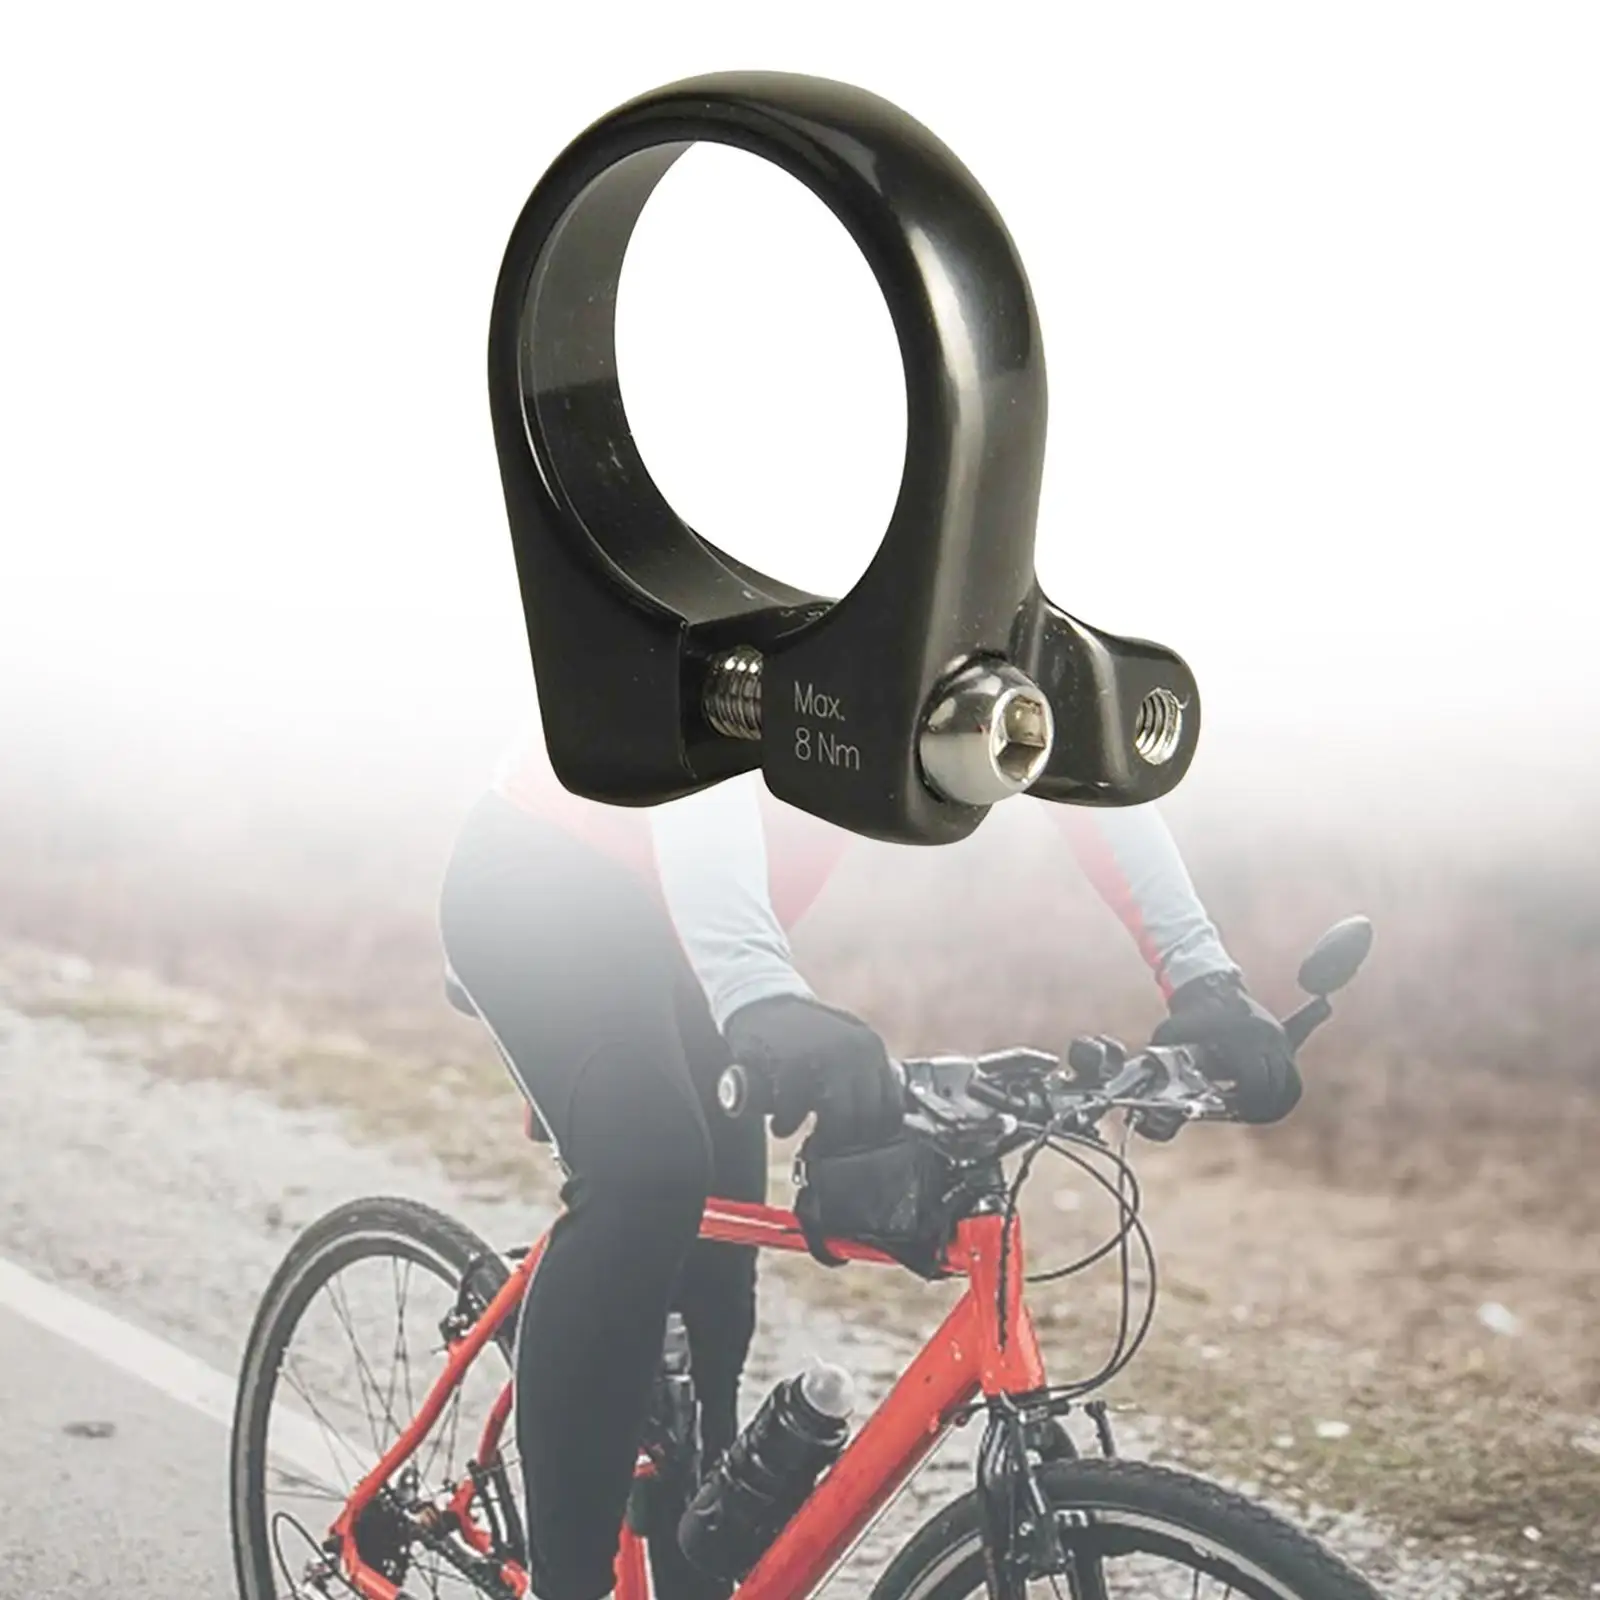 Bike Rear Rack Adapter Bicycle Accessories Connector for Outdoor Mountain Bike Rear Rack